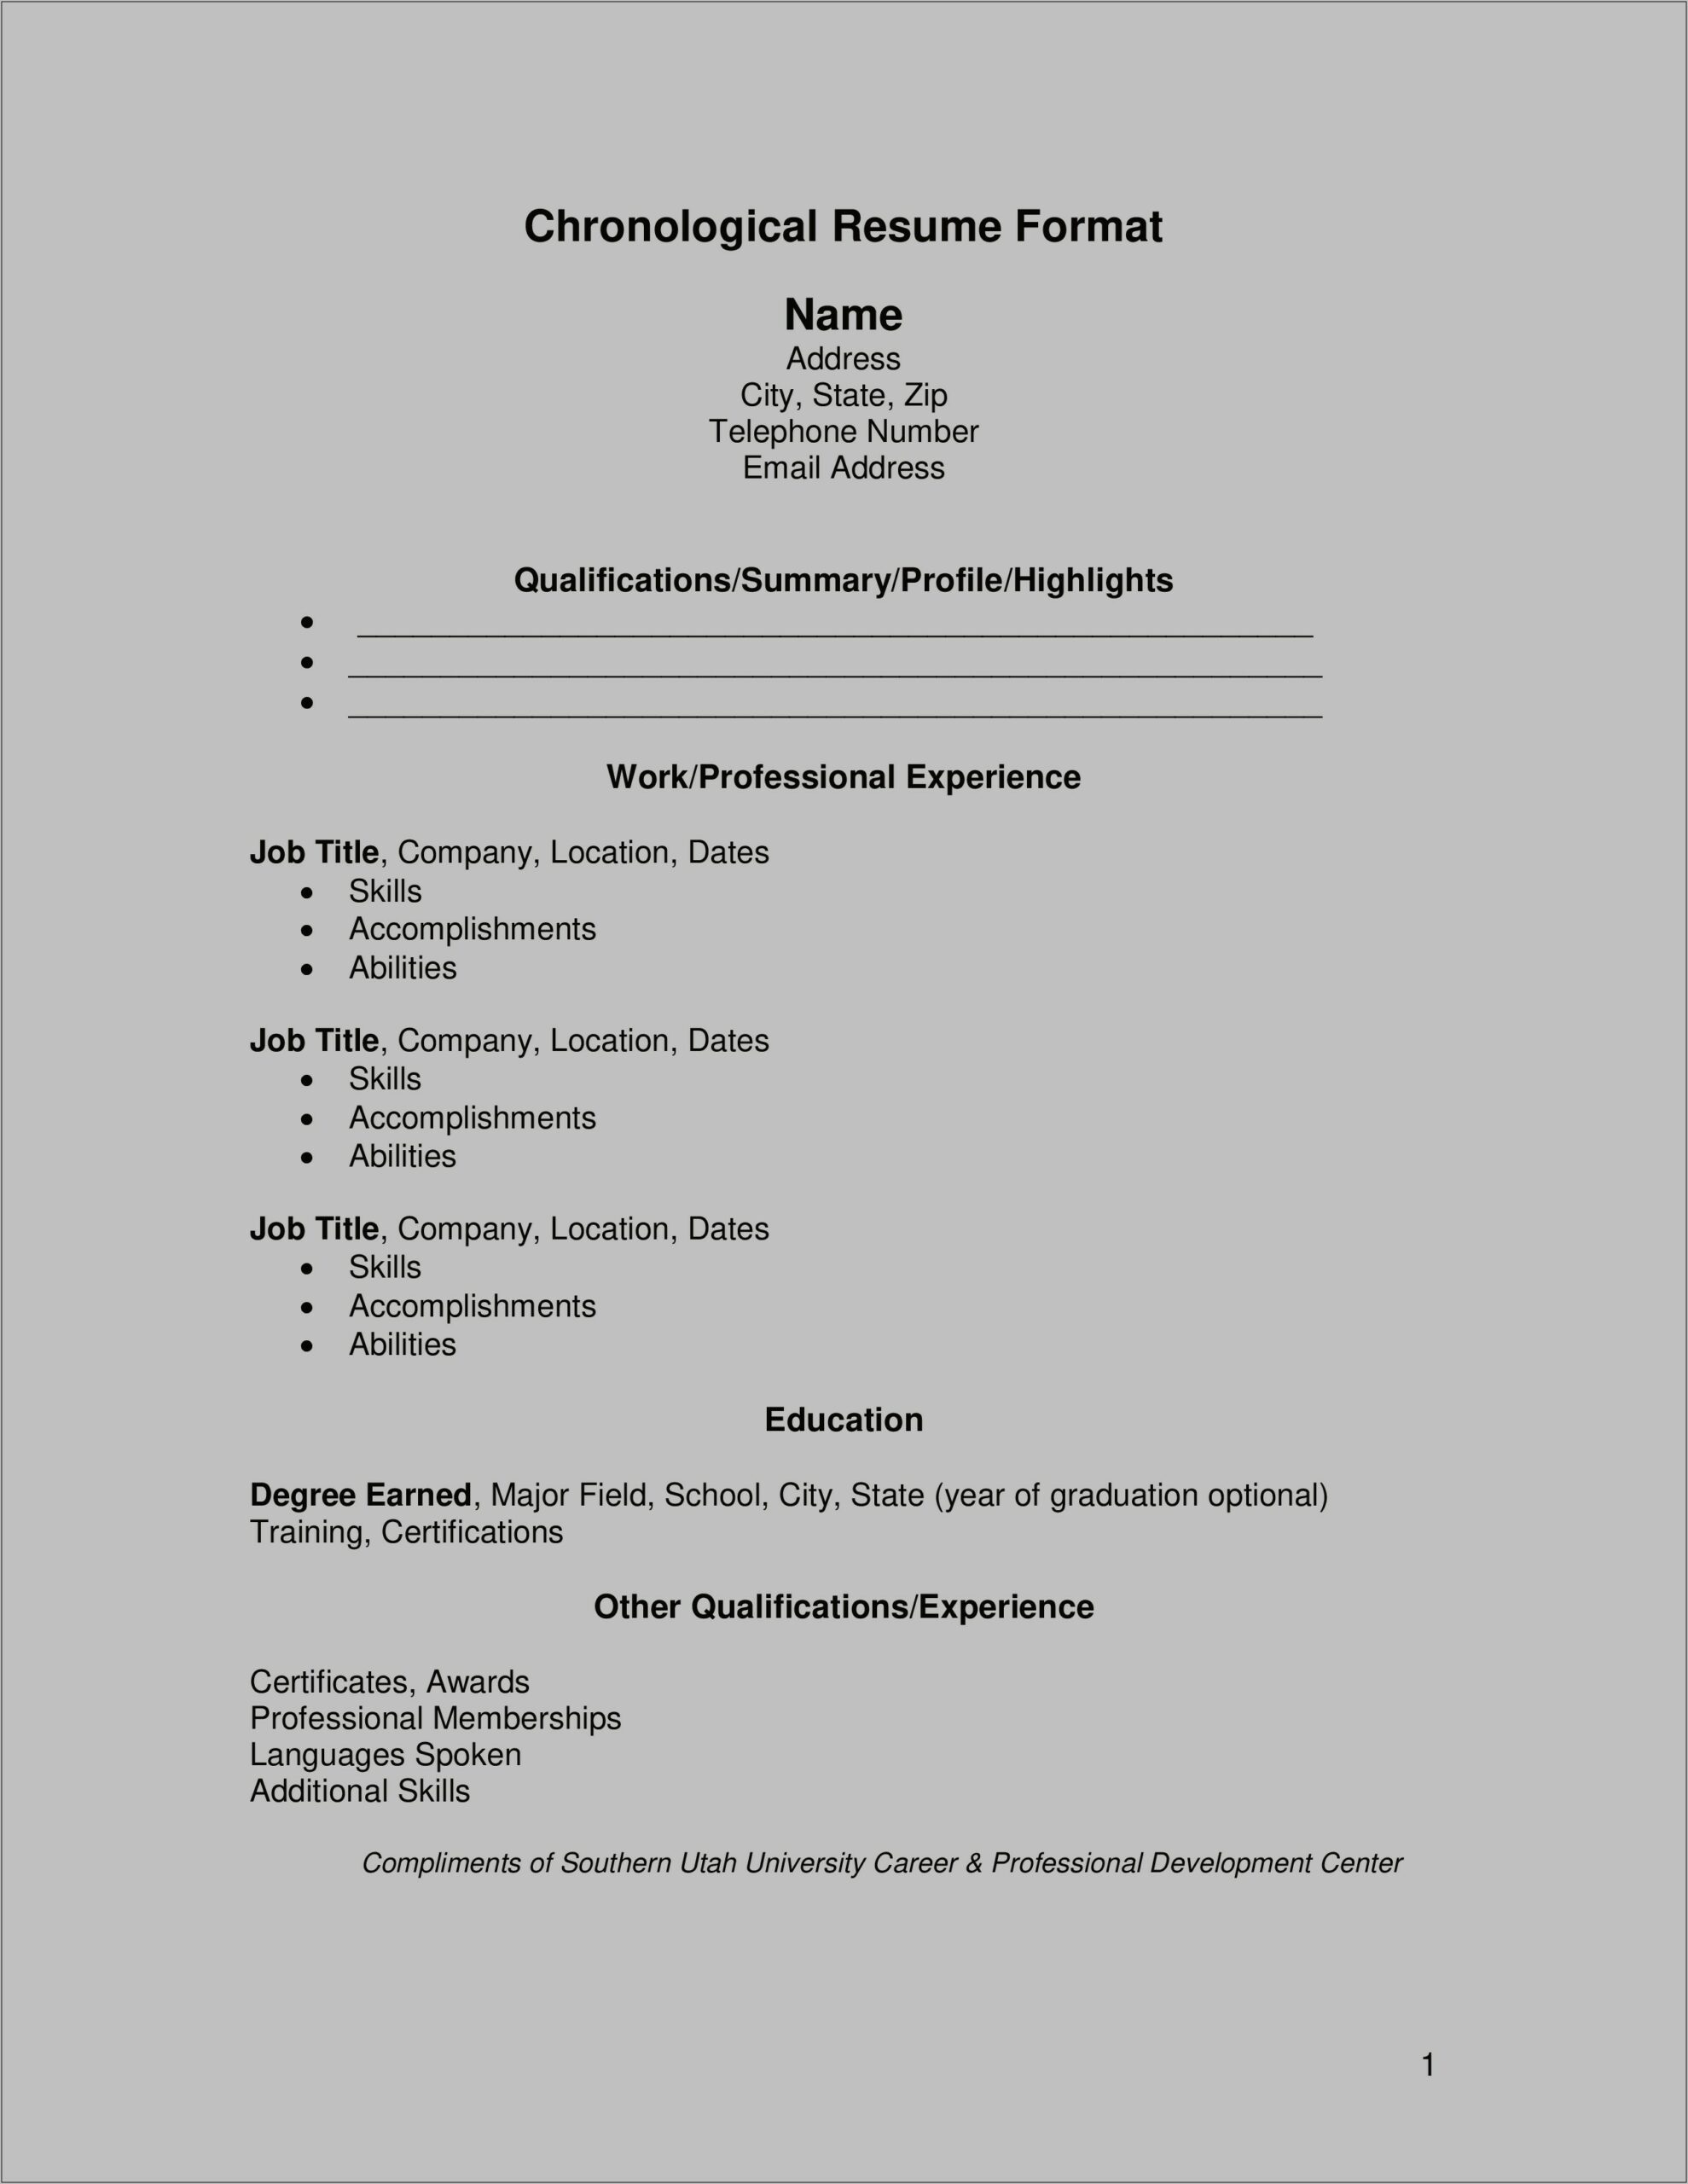 Resume With Only One Previous Job